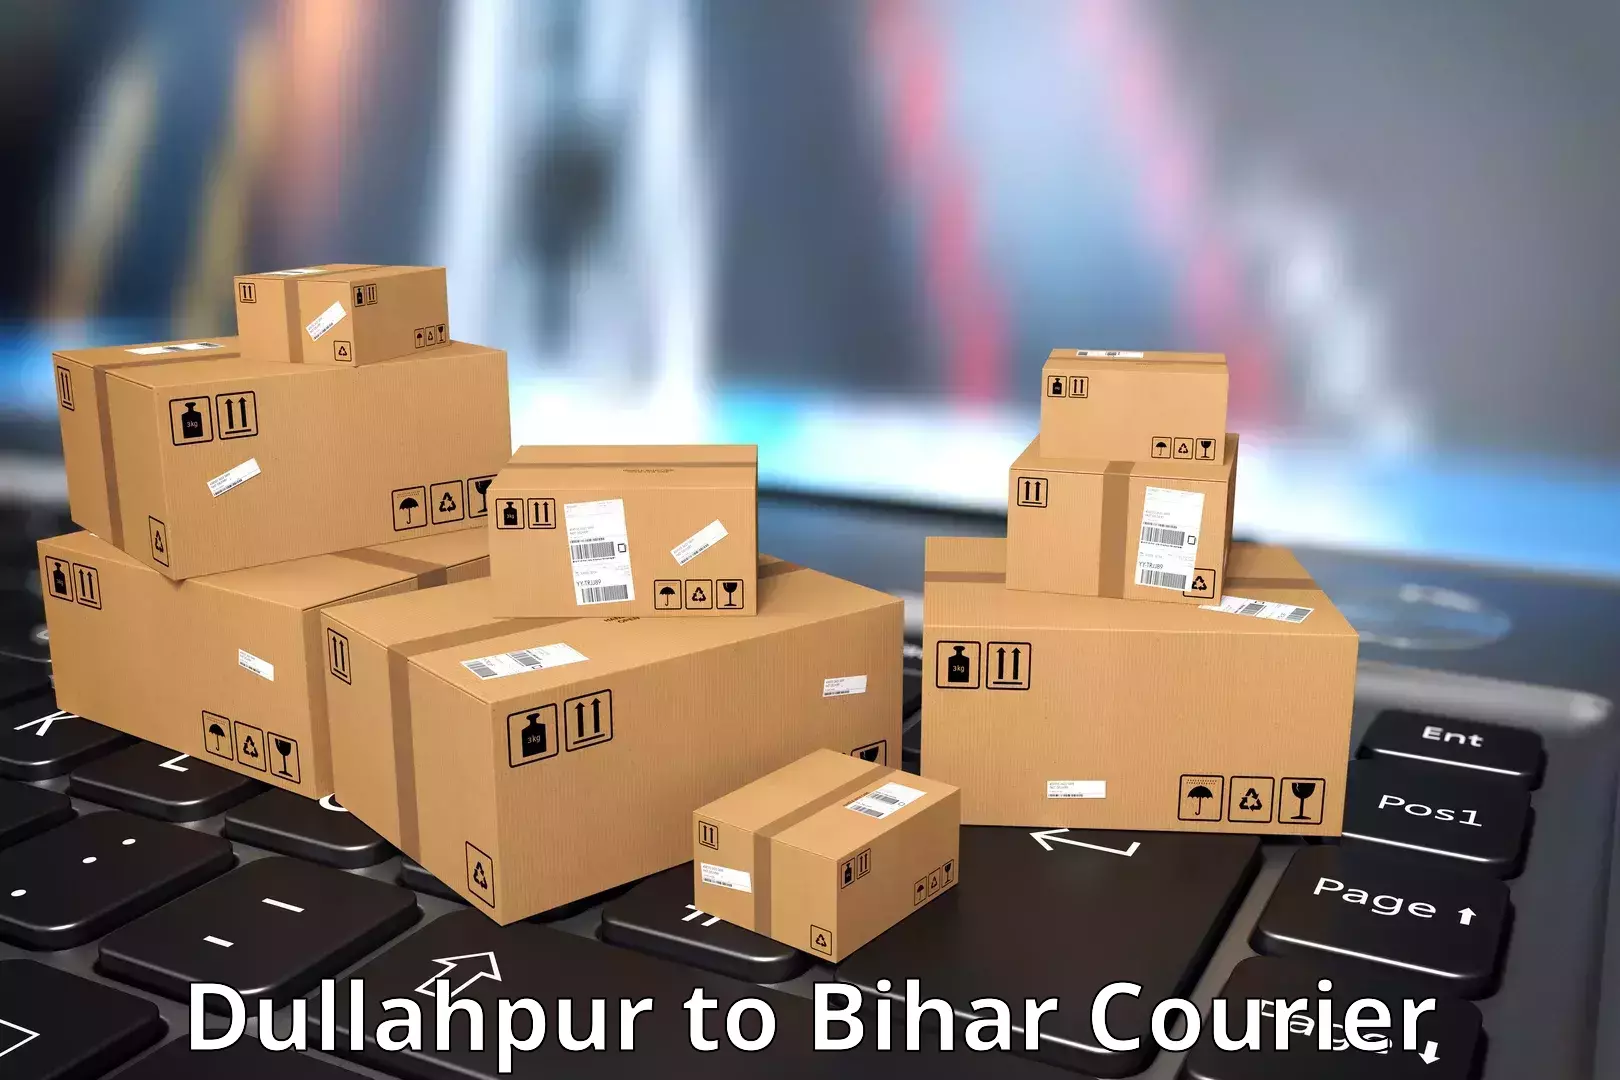 Flexible delivery schedules Dullahpur to Patna